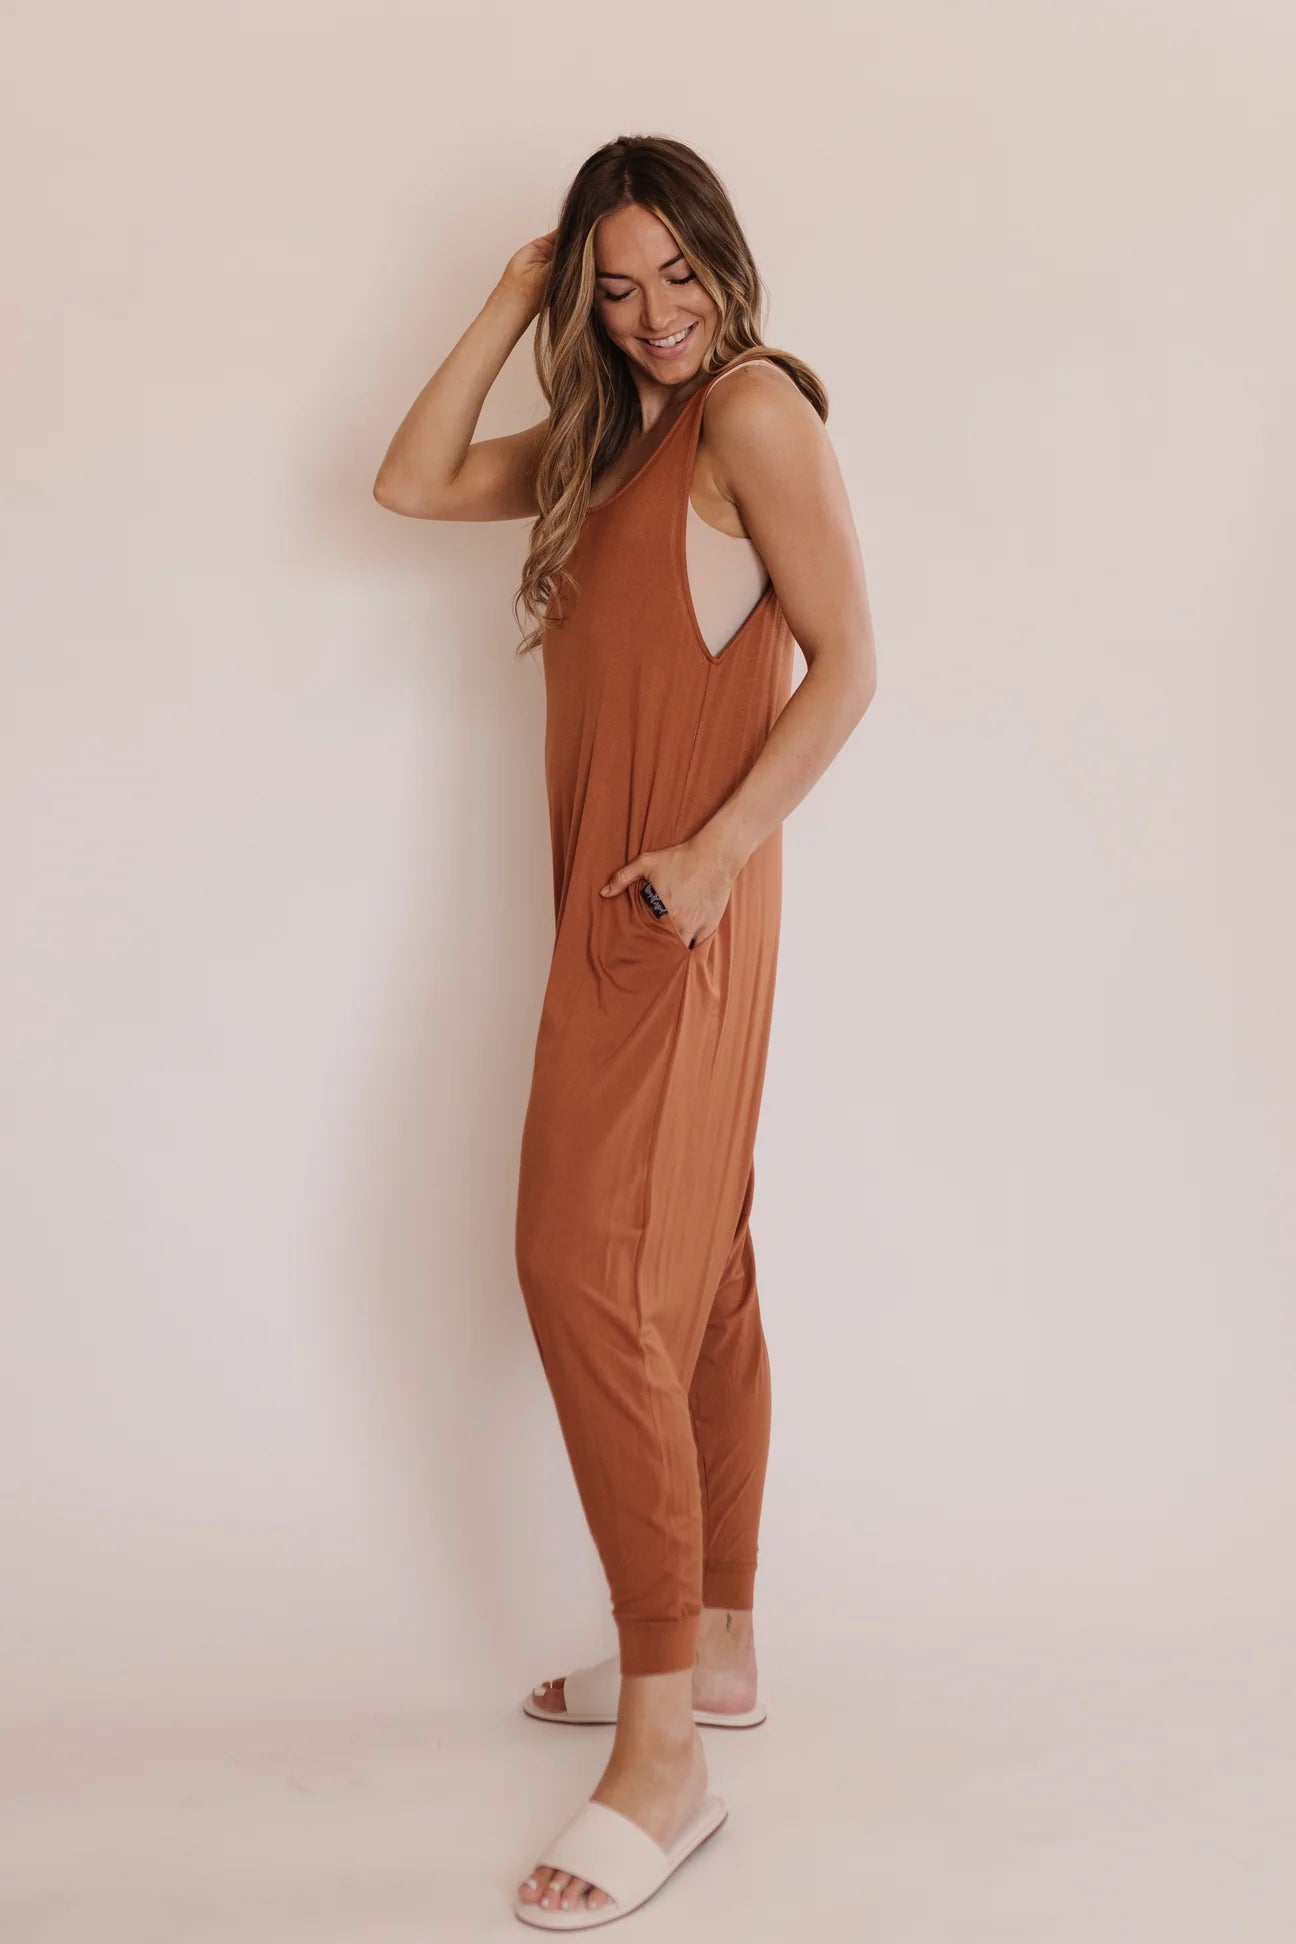 momper romper mom clothes pregnancy overall jumpsuit for mommy ultra comfortable and loose stretch fabric spandex and rayon mks miminoo gilbert arizona burnt orange terracotta